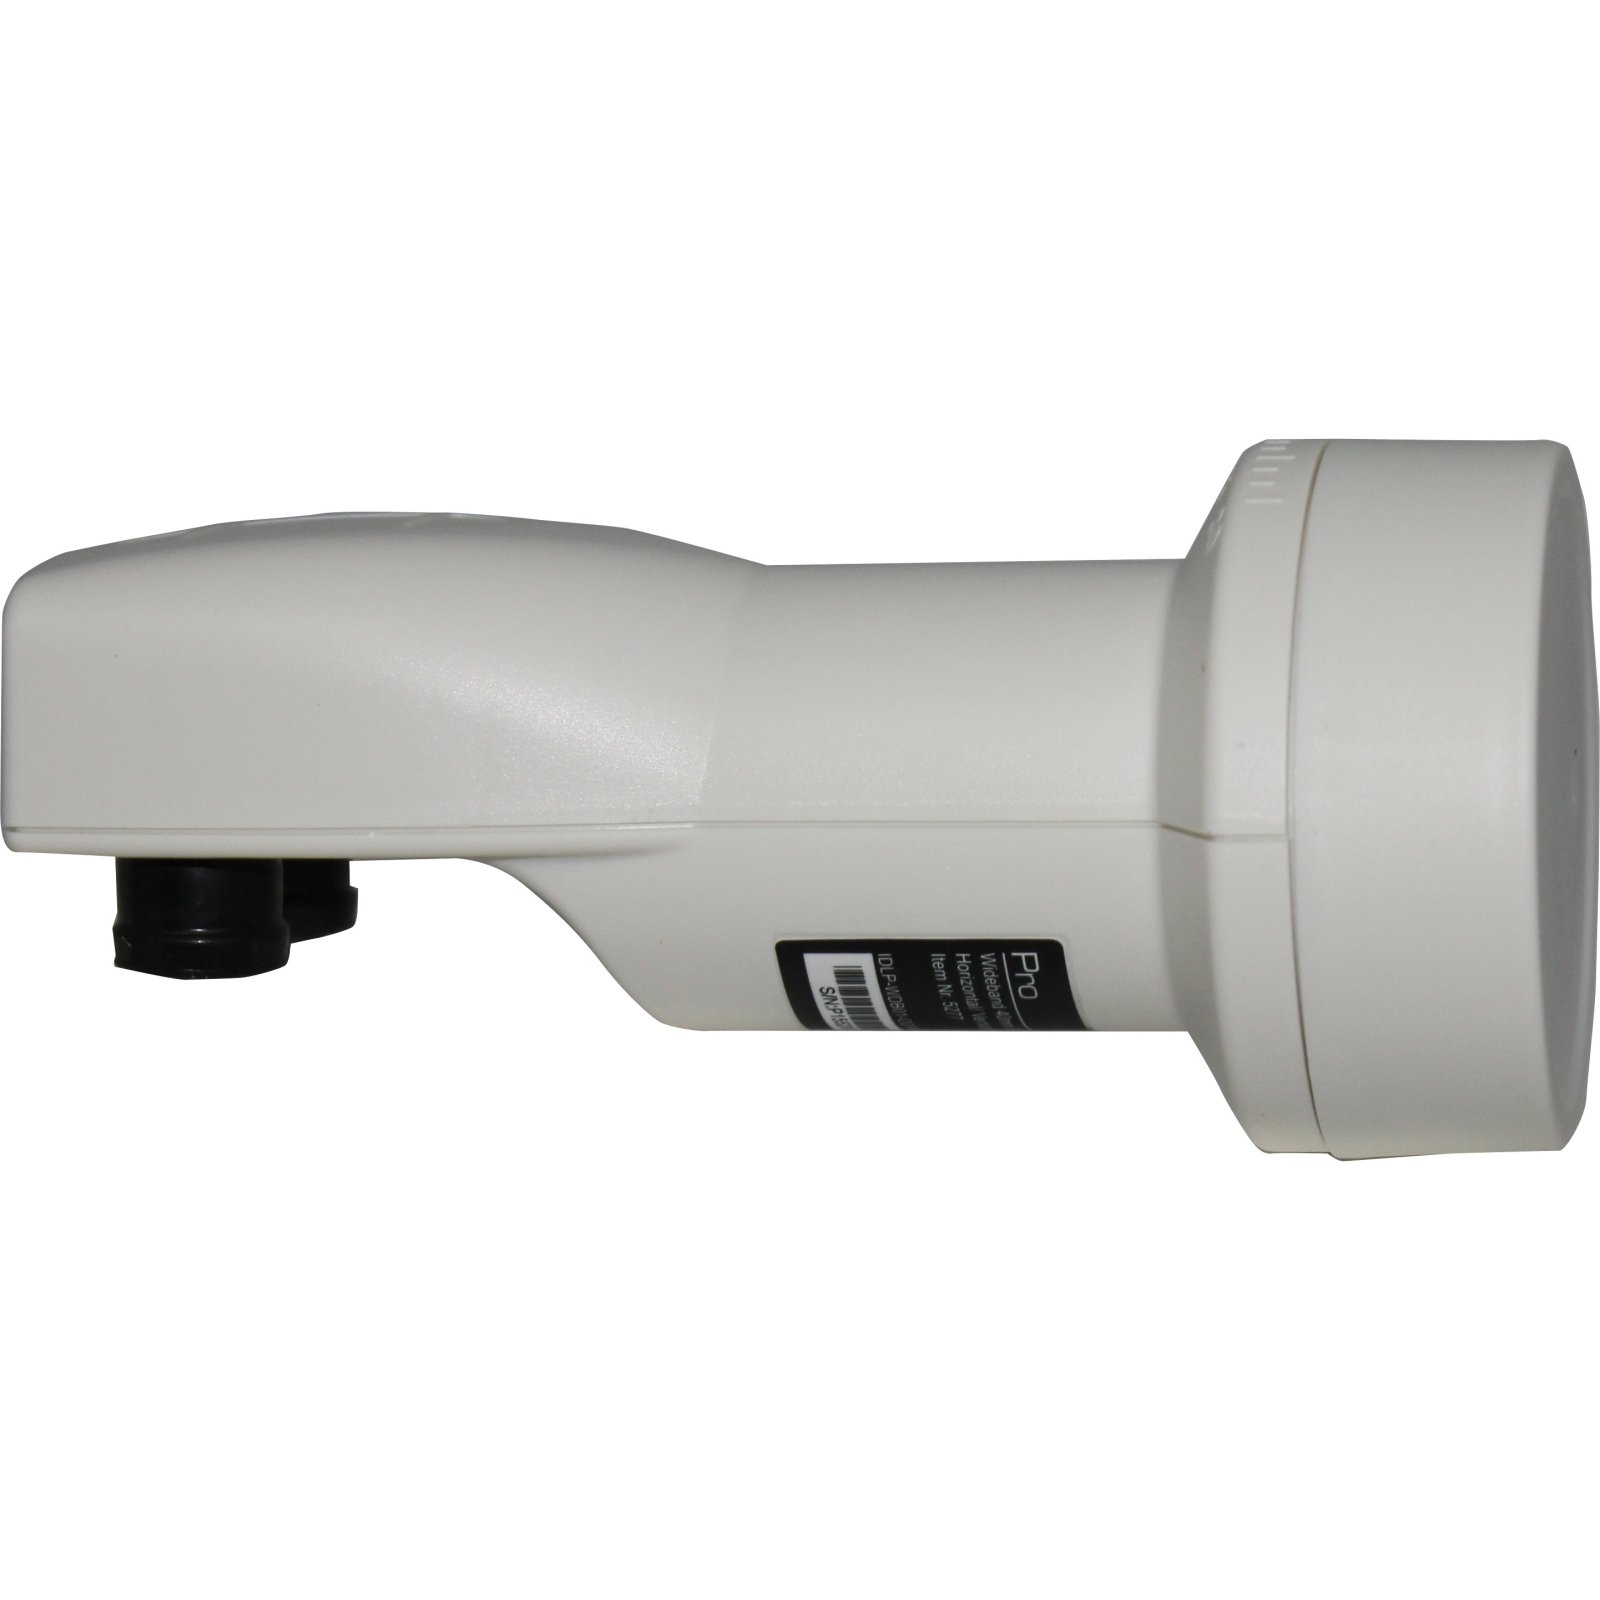 Inverto Wideband LNB fuer unicable